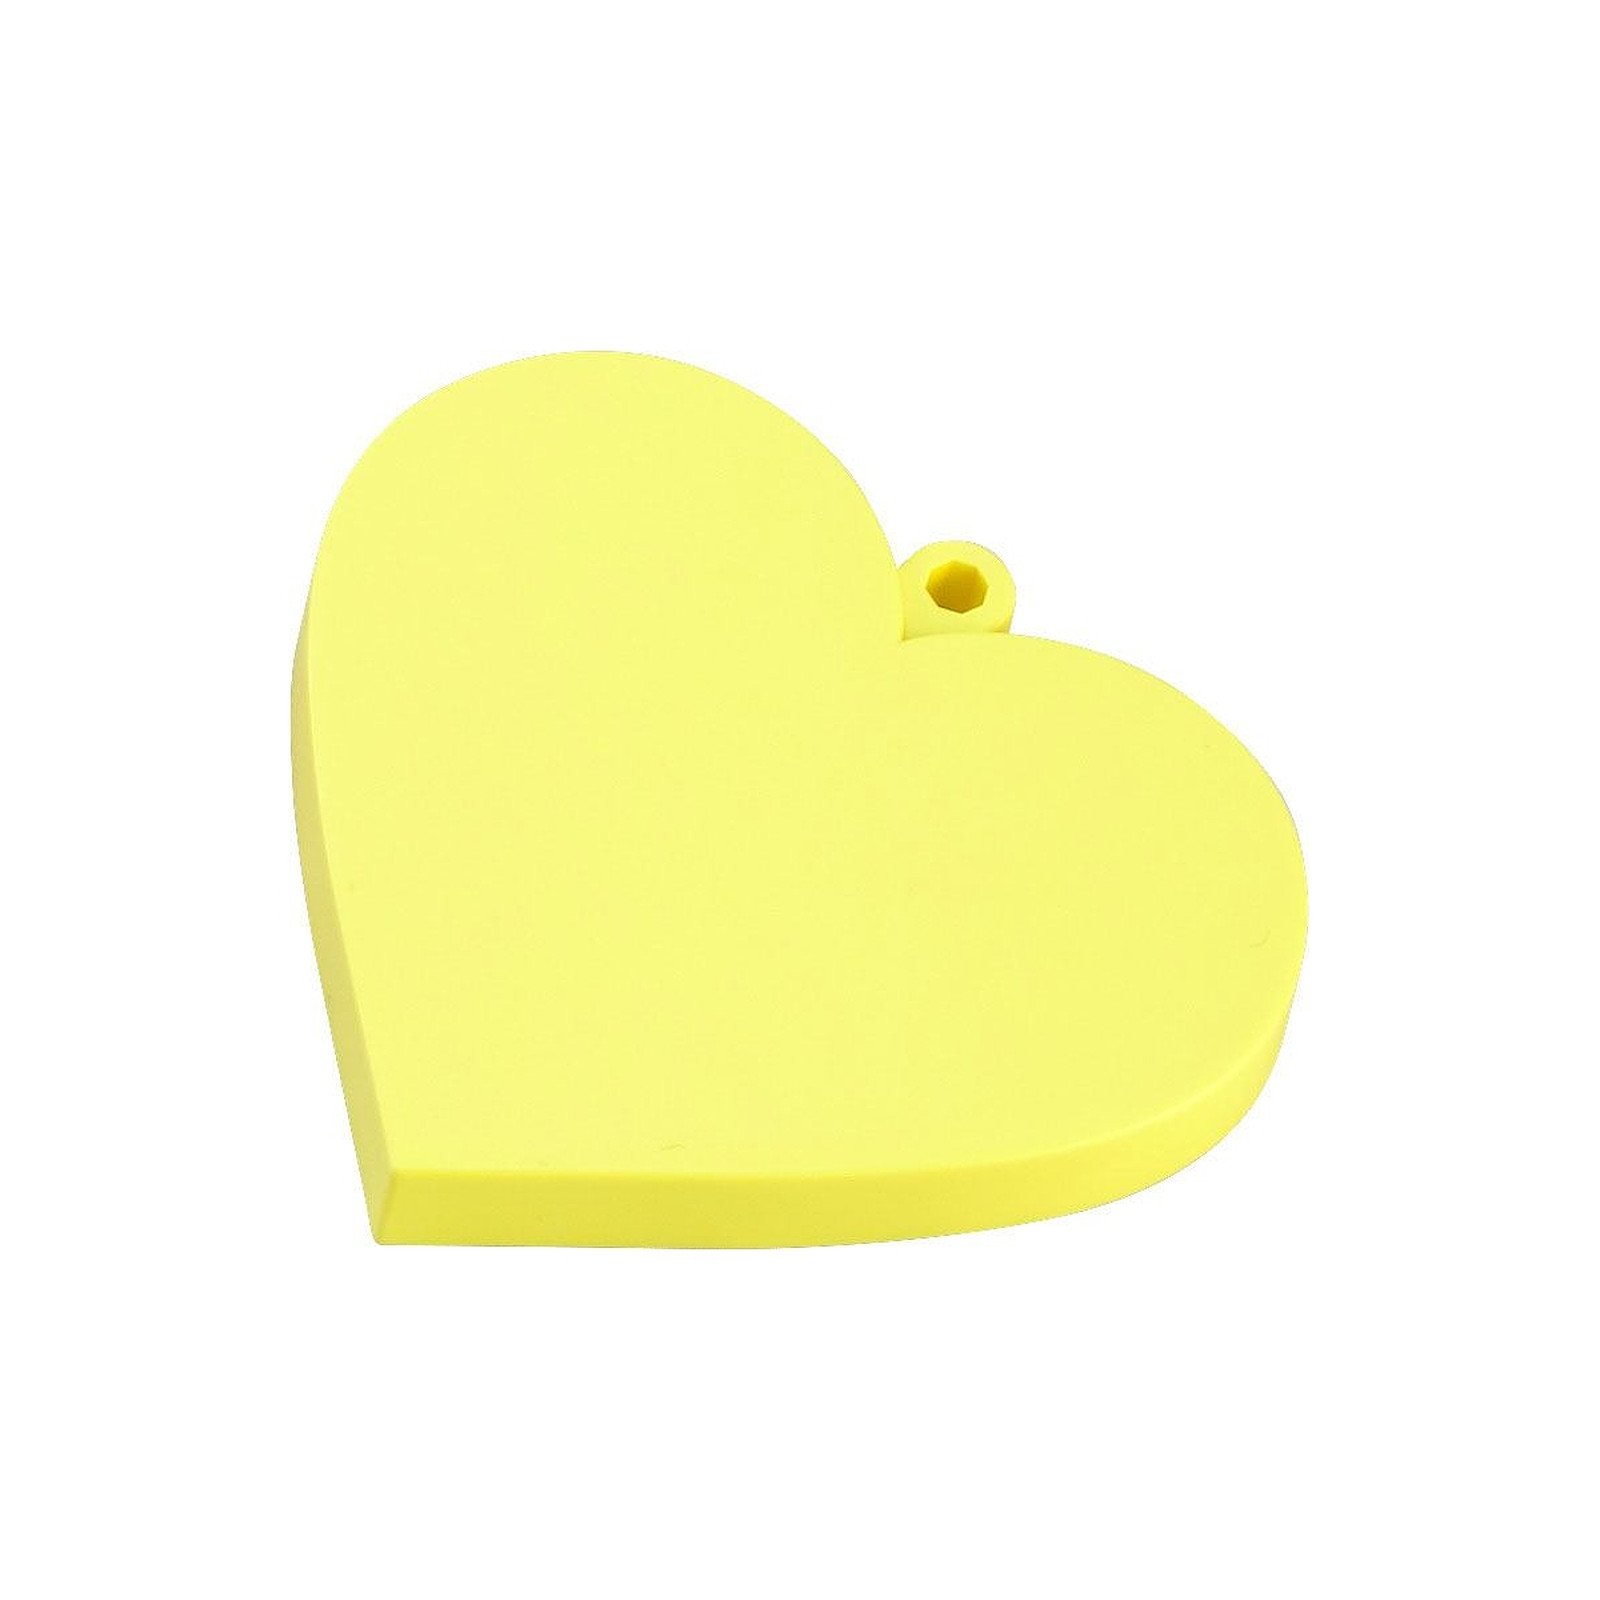 Nendoroid More - Socle pour figurines Nendoroid Heart Yellow Version - Figurines Good Smile Company